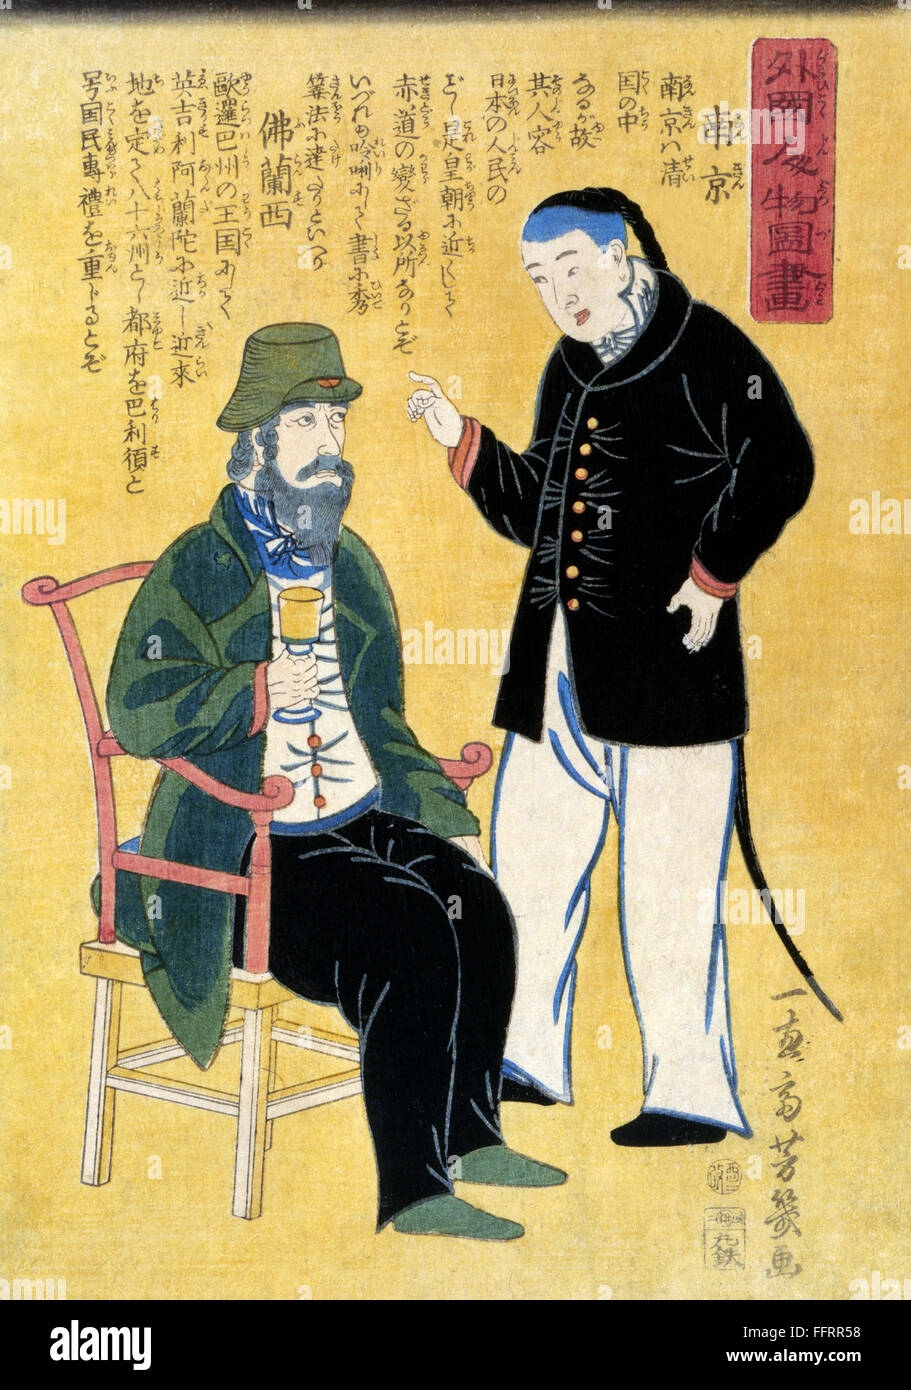 JAPAN: FOREIGNERS, c1861. /nA Japanese woodcut depicting a Chinese man standing and talking to a Frenchman seated on a chair holding a goblet. Color woodcut by Utagawa Yoshiiku (Ochiai), c1861. Stock Photo